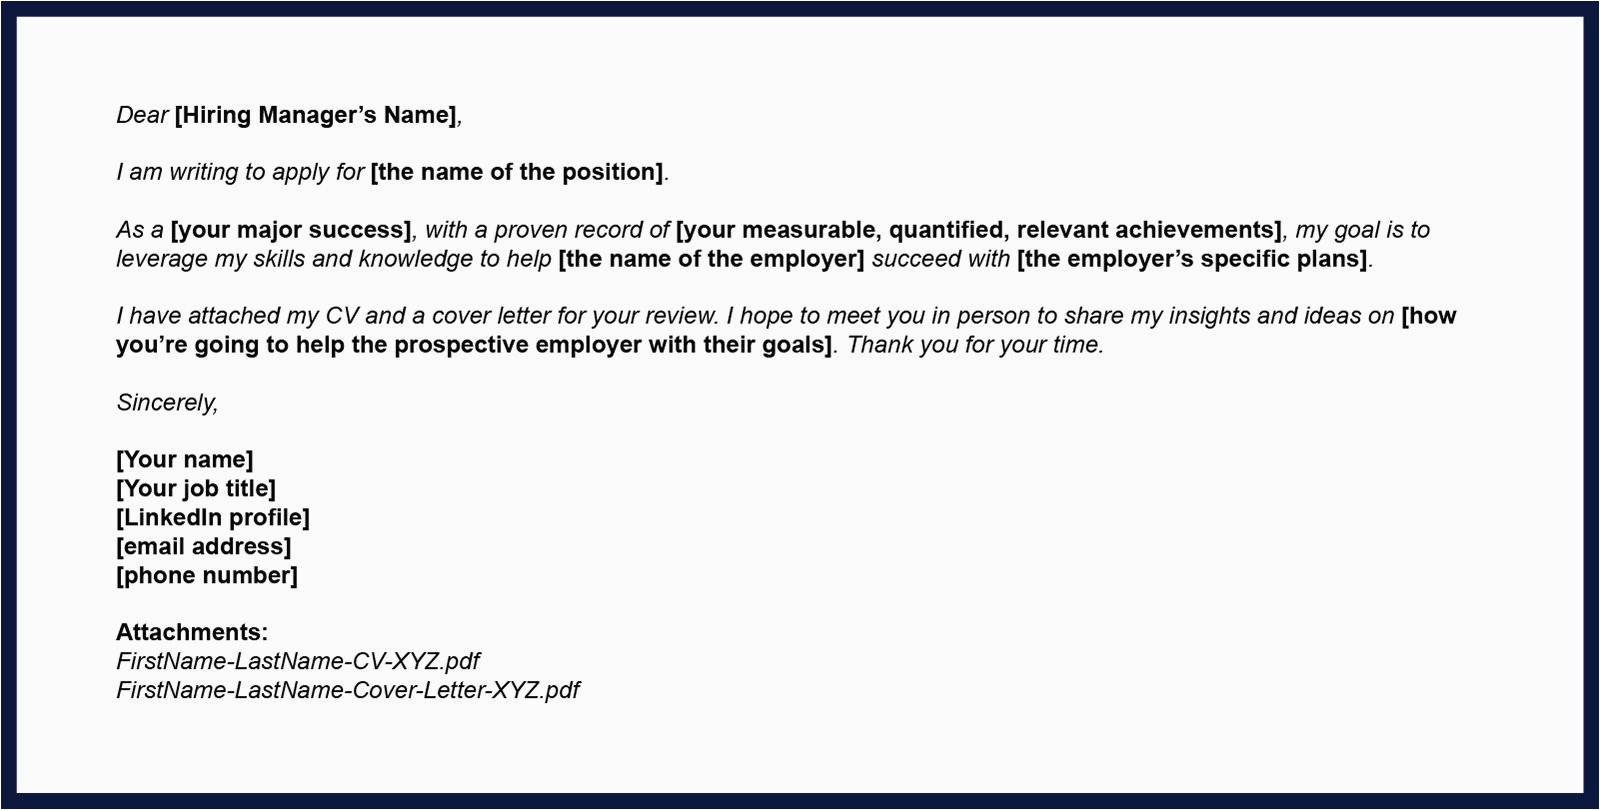 Sample Letter for Sending Resume to Friend Resume Email to Friend Template toolbox How to ask A